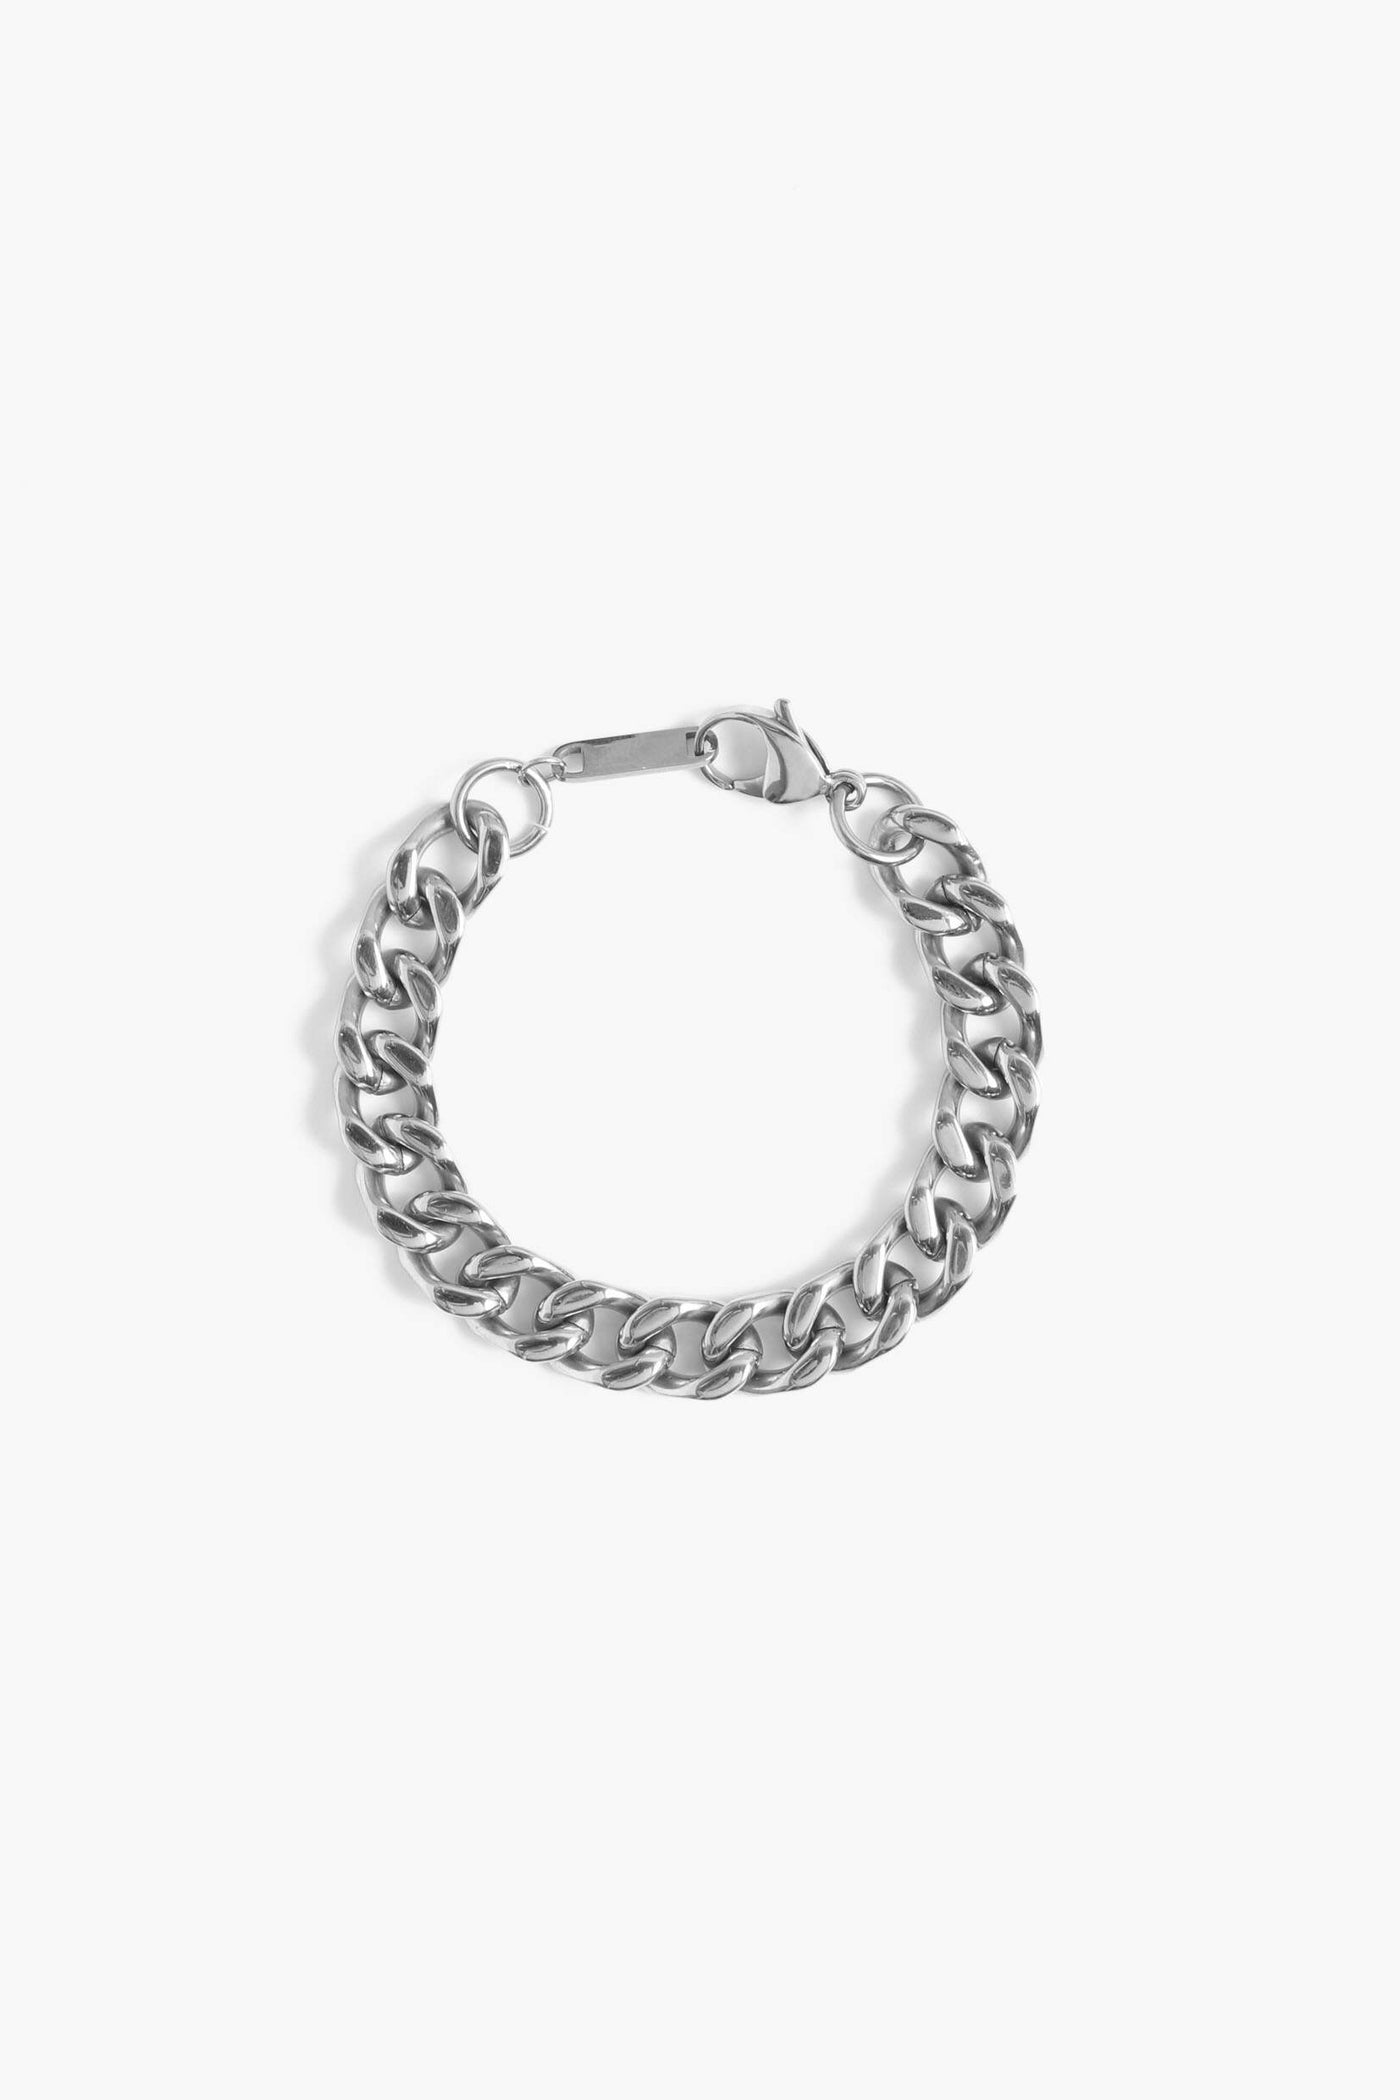 Marrin Costello Jewelry Queens Cuban Link chain bracelet with lobster clasp closure. Waterproof, sustainable, hypoallergenic. Polished stainless steel.